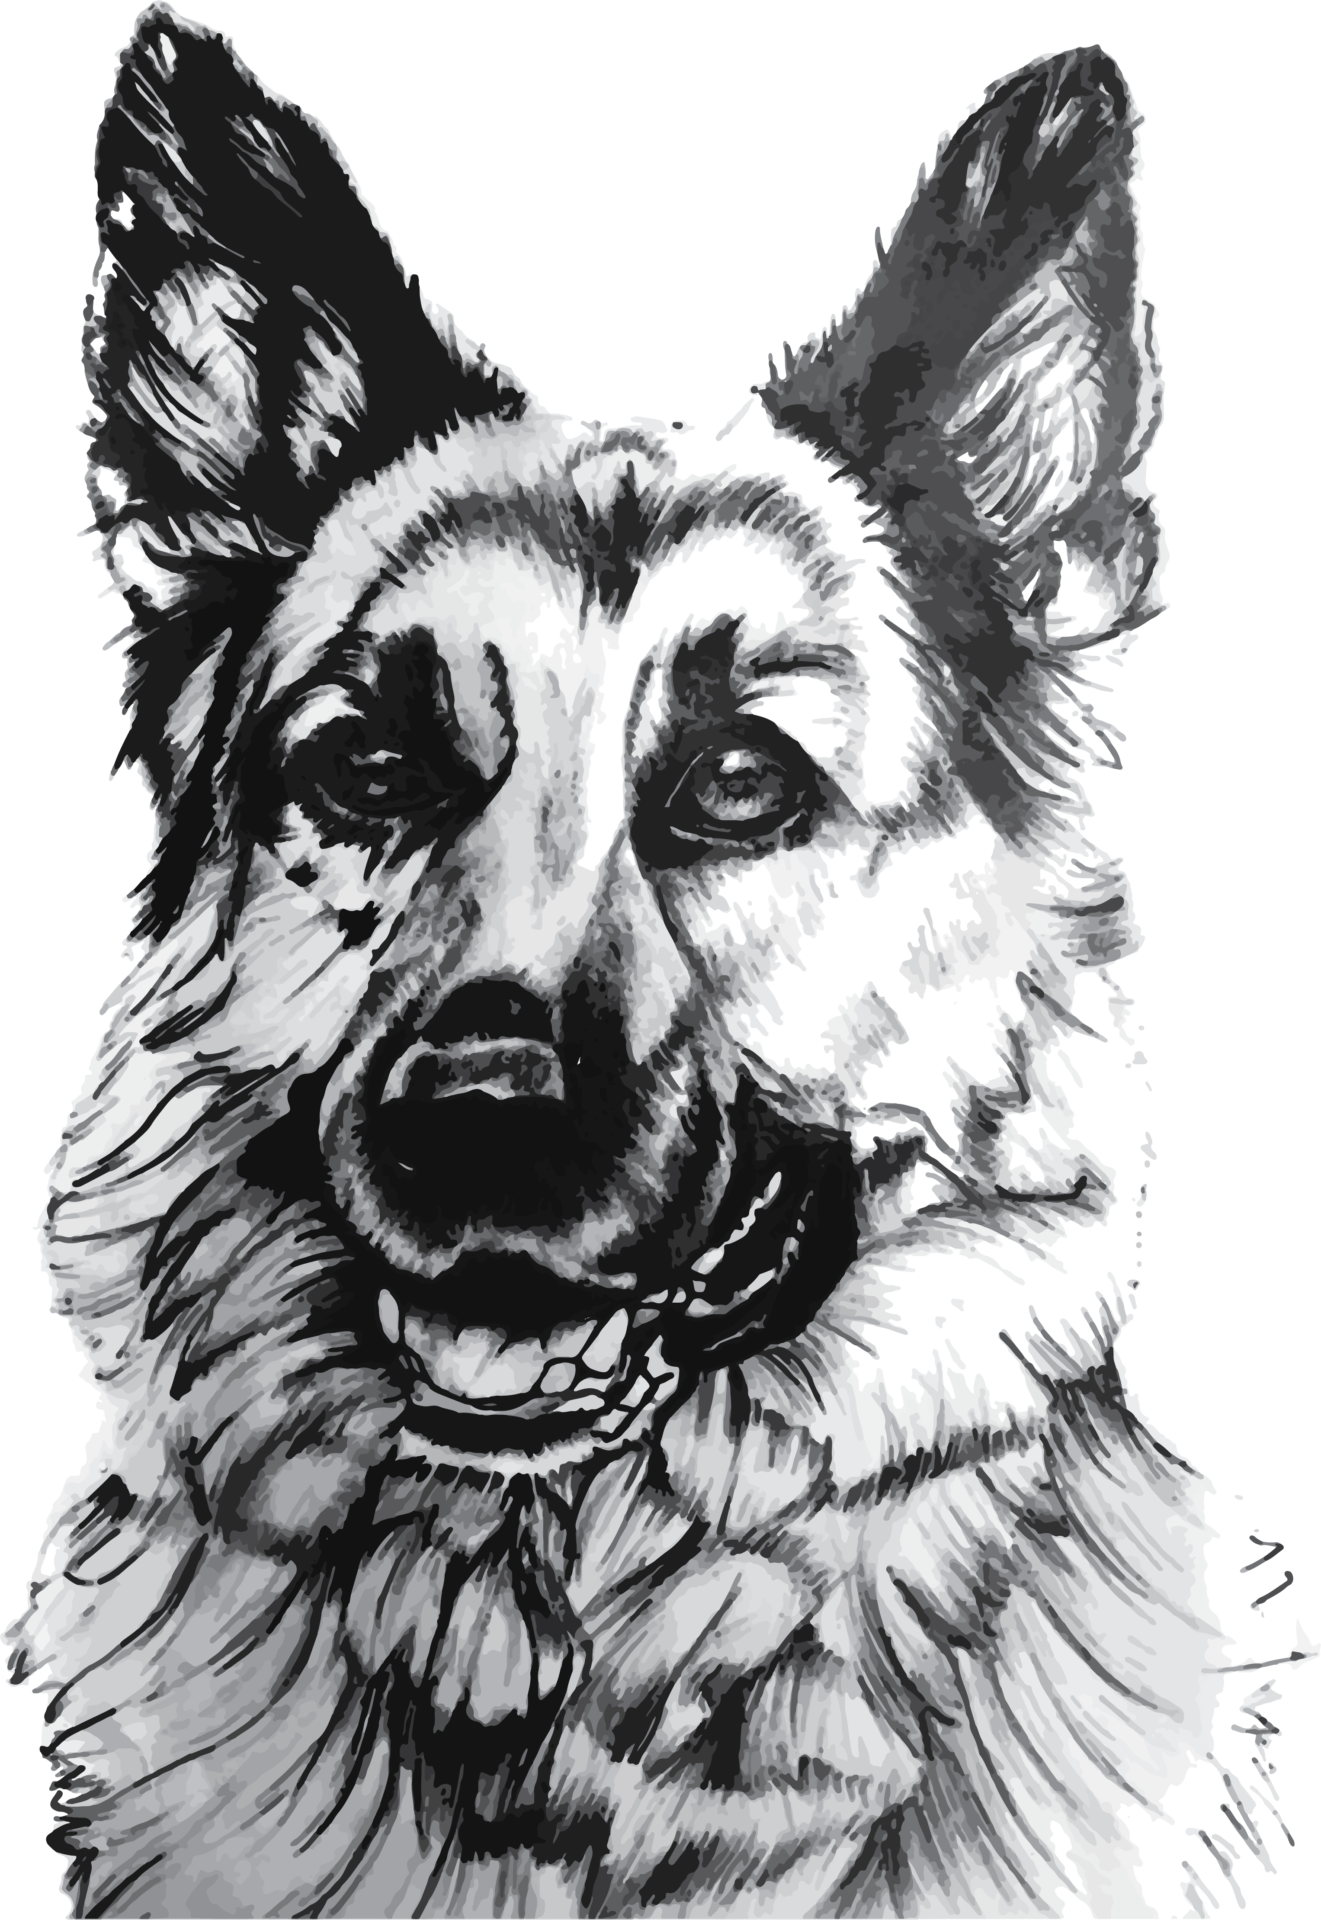 A German shepherd dog portrait sketched by EyeXcite's artist. Order your custom cartoon and/or sketching today.